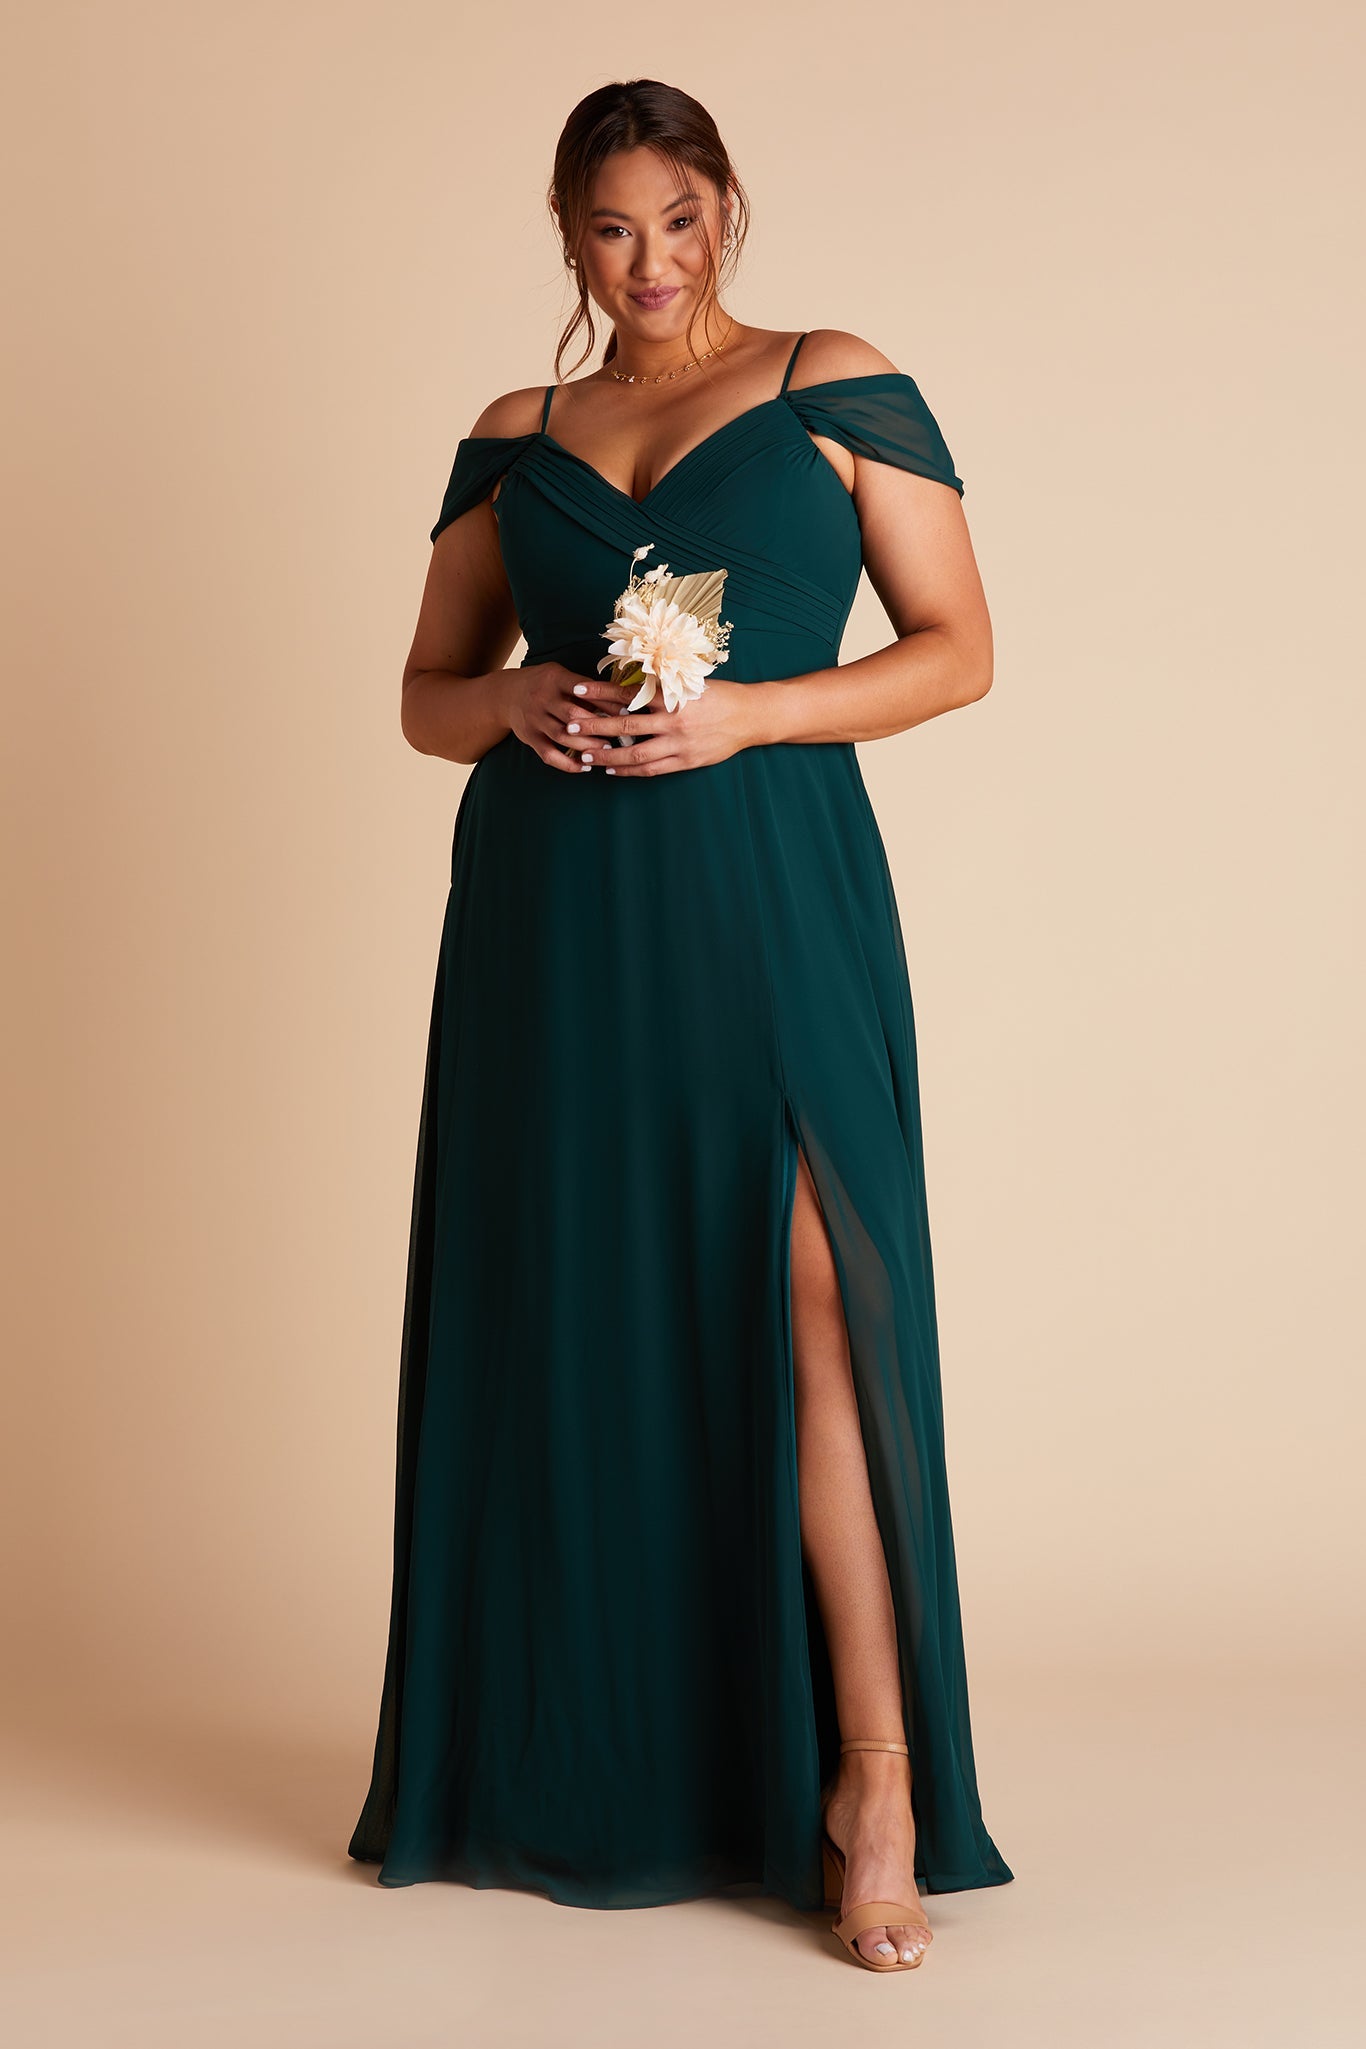 dress for big tummy  Plus size evening gown, Plus size gowns formal,  Bridesmaid dresses plus size